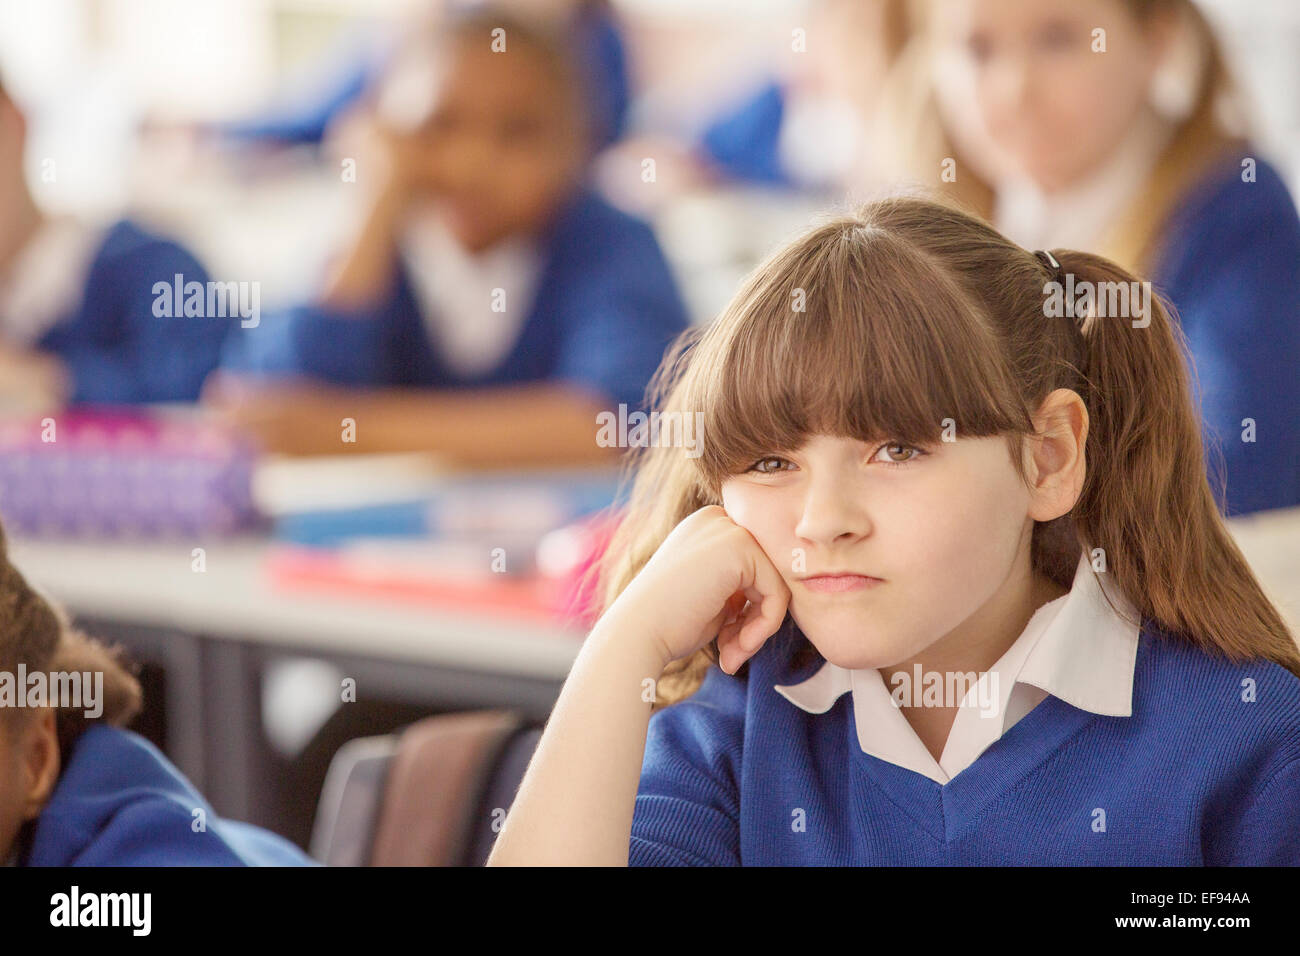 Elementary schoolgirl looking bored during lesson Stock Photo